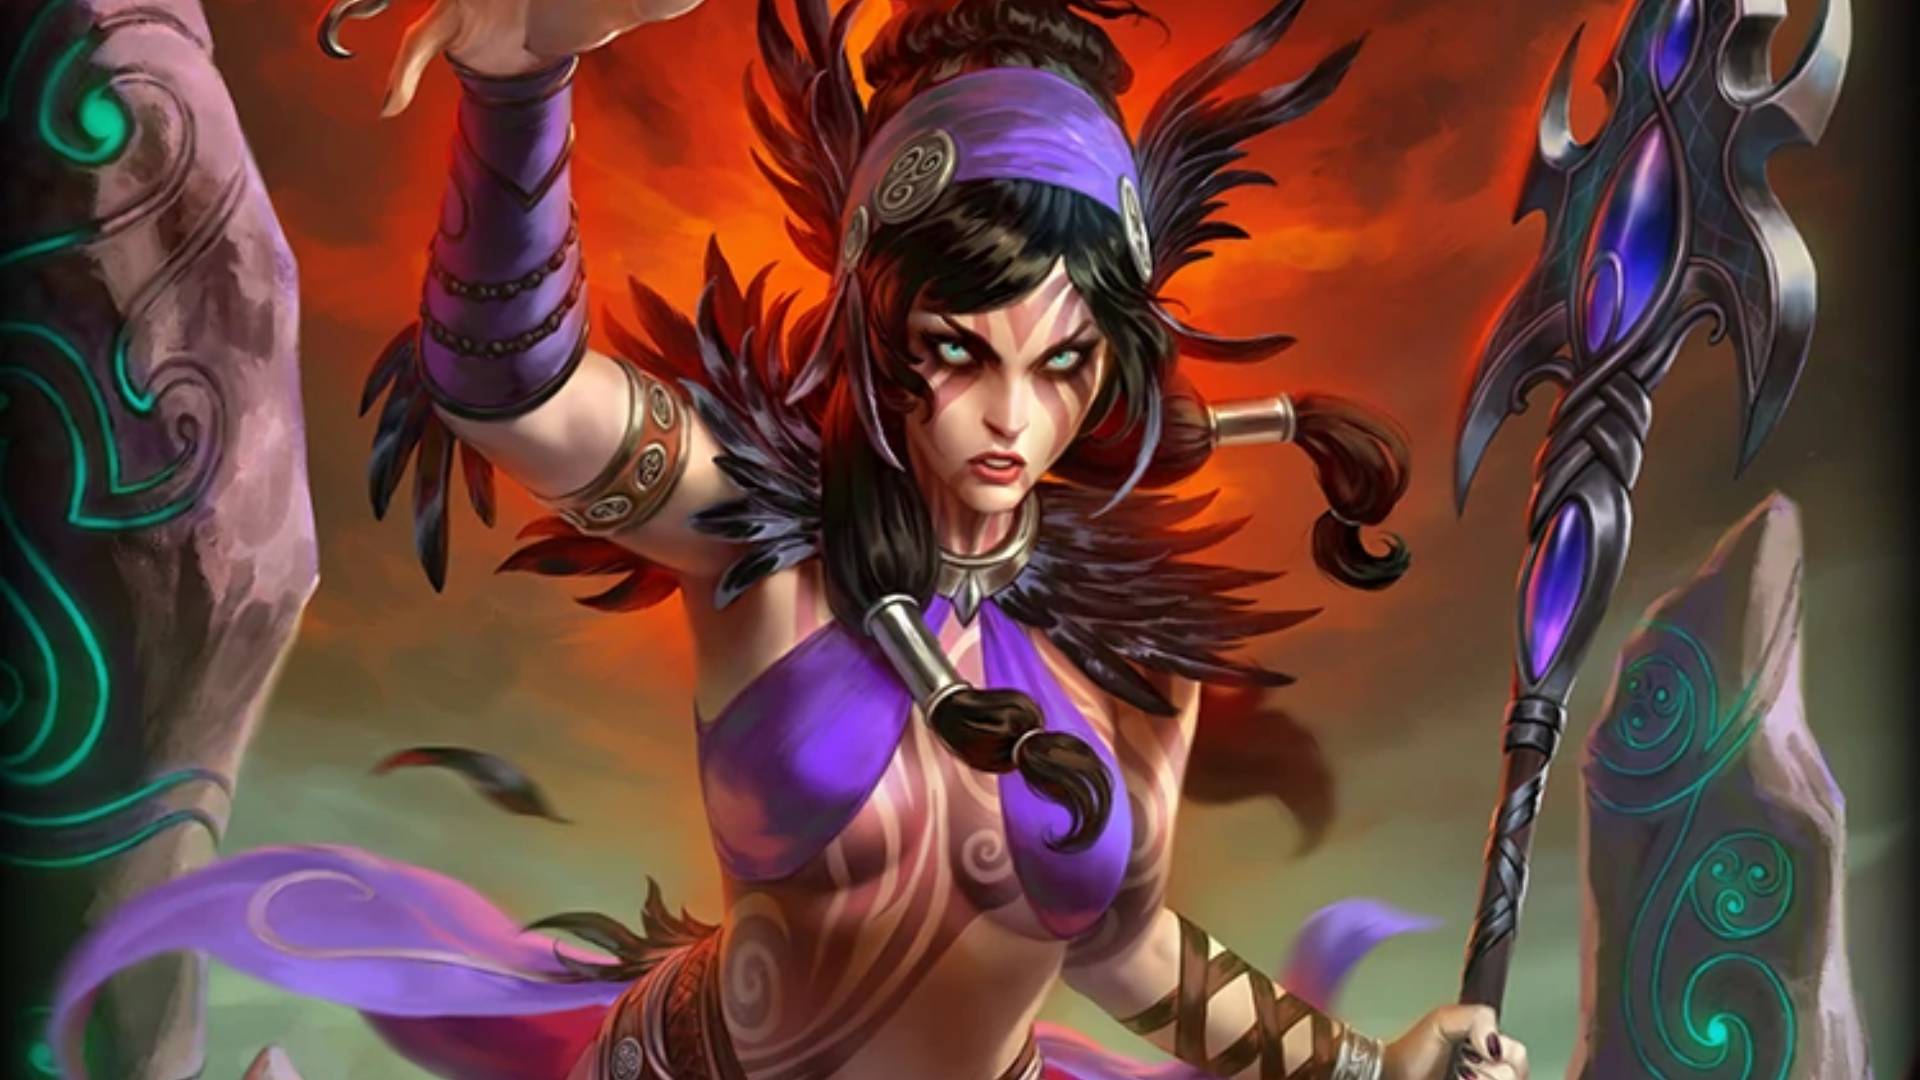 Smite 2 wasn't planned, but one huge discovery changed everything